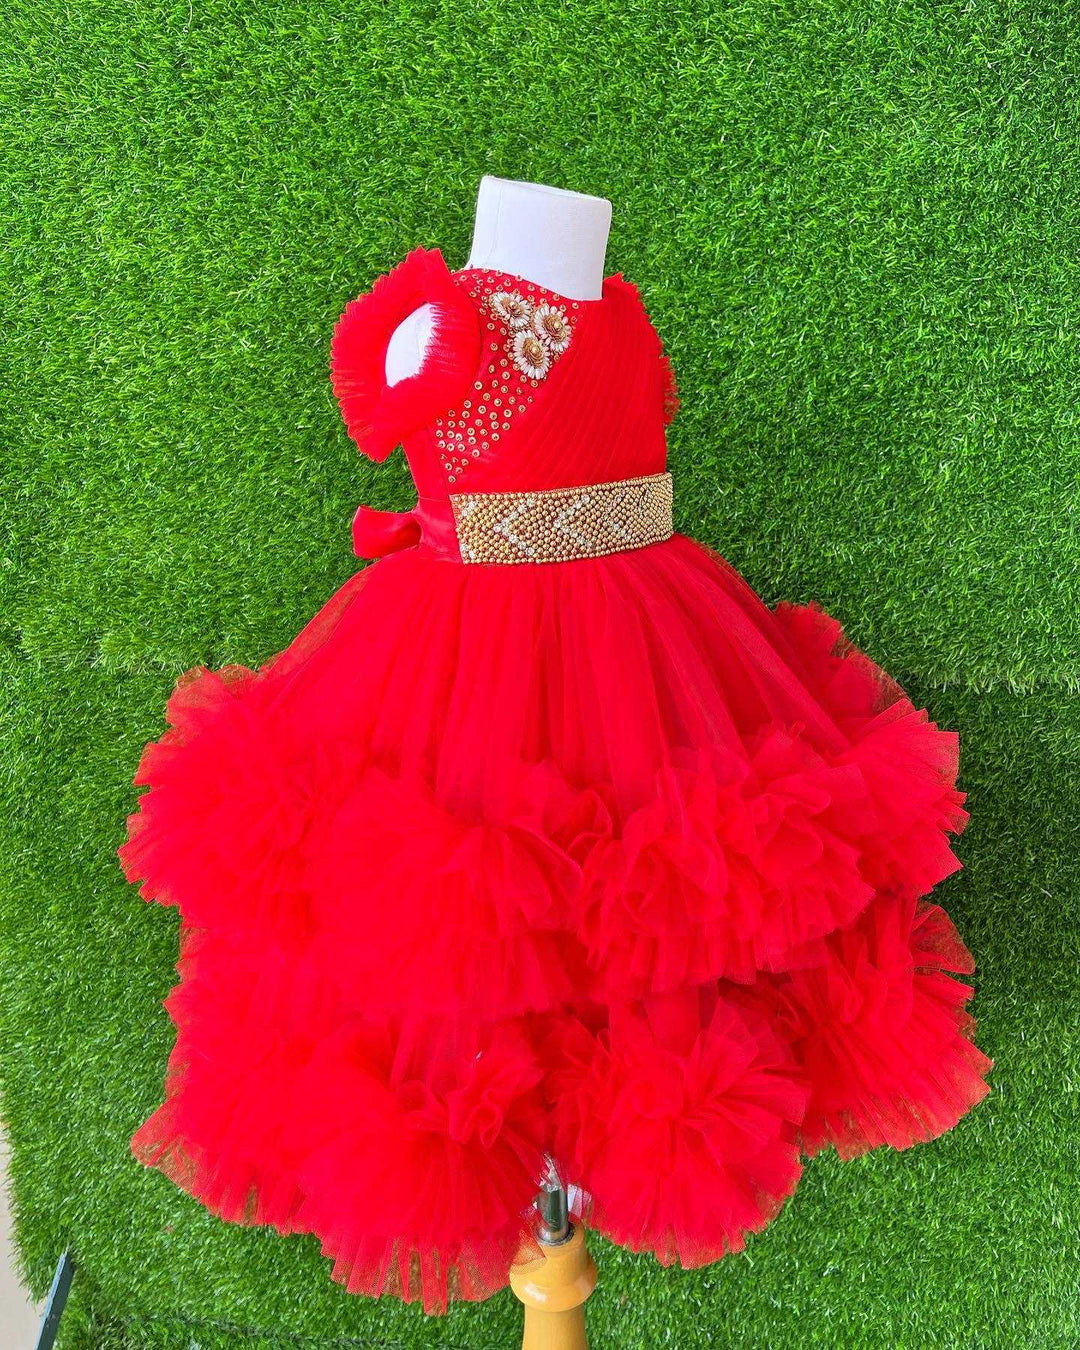 Red Layered Pleated Heavy Ruffled Hand embroidery Birthday Frock

Material: Bright red nylon mono net with layered and ruffles on the end portion. Yoke portion is designed with pleated pattern and a handwork in the centre portion